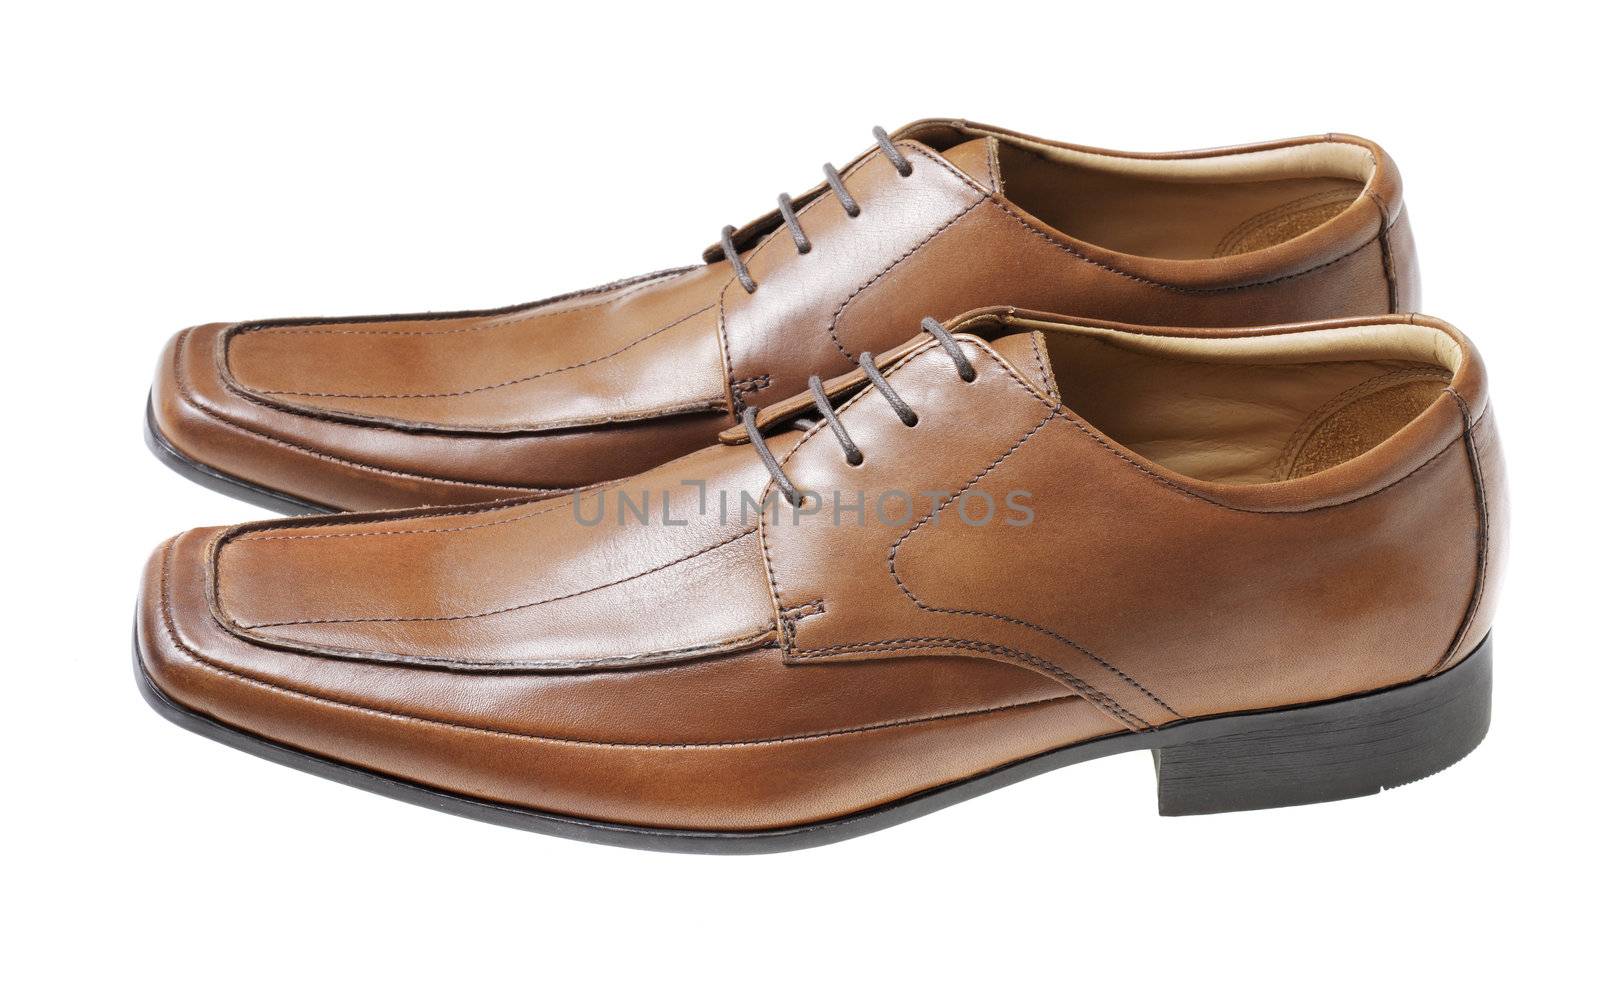 Men's brown leather dress shoes isolated on white